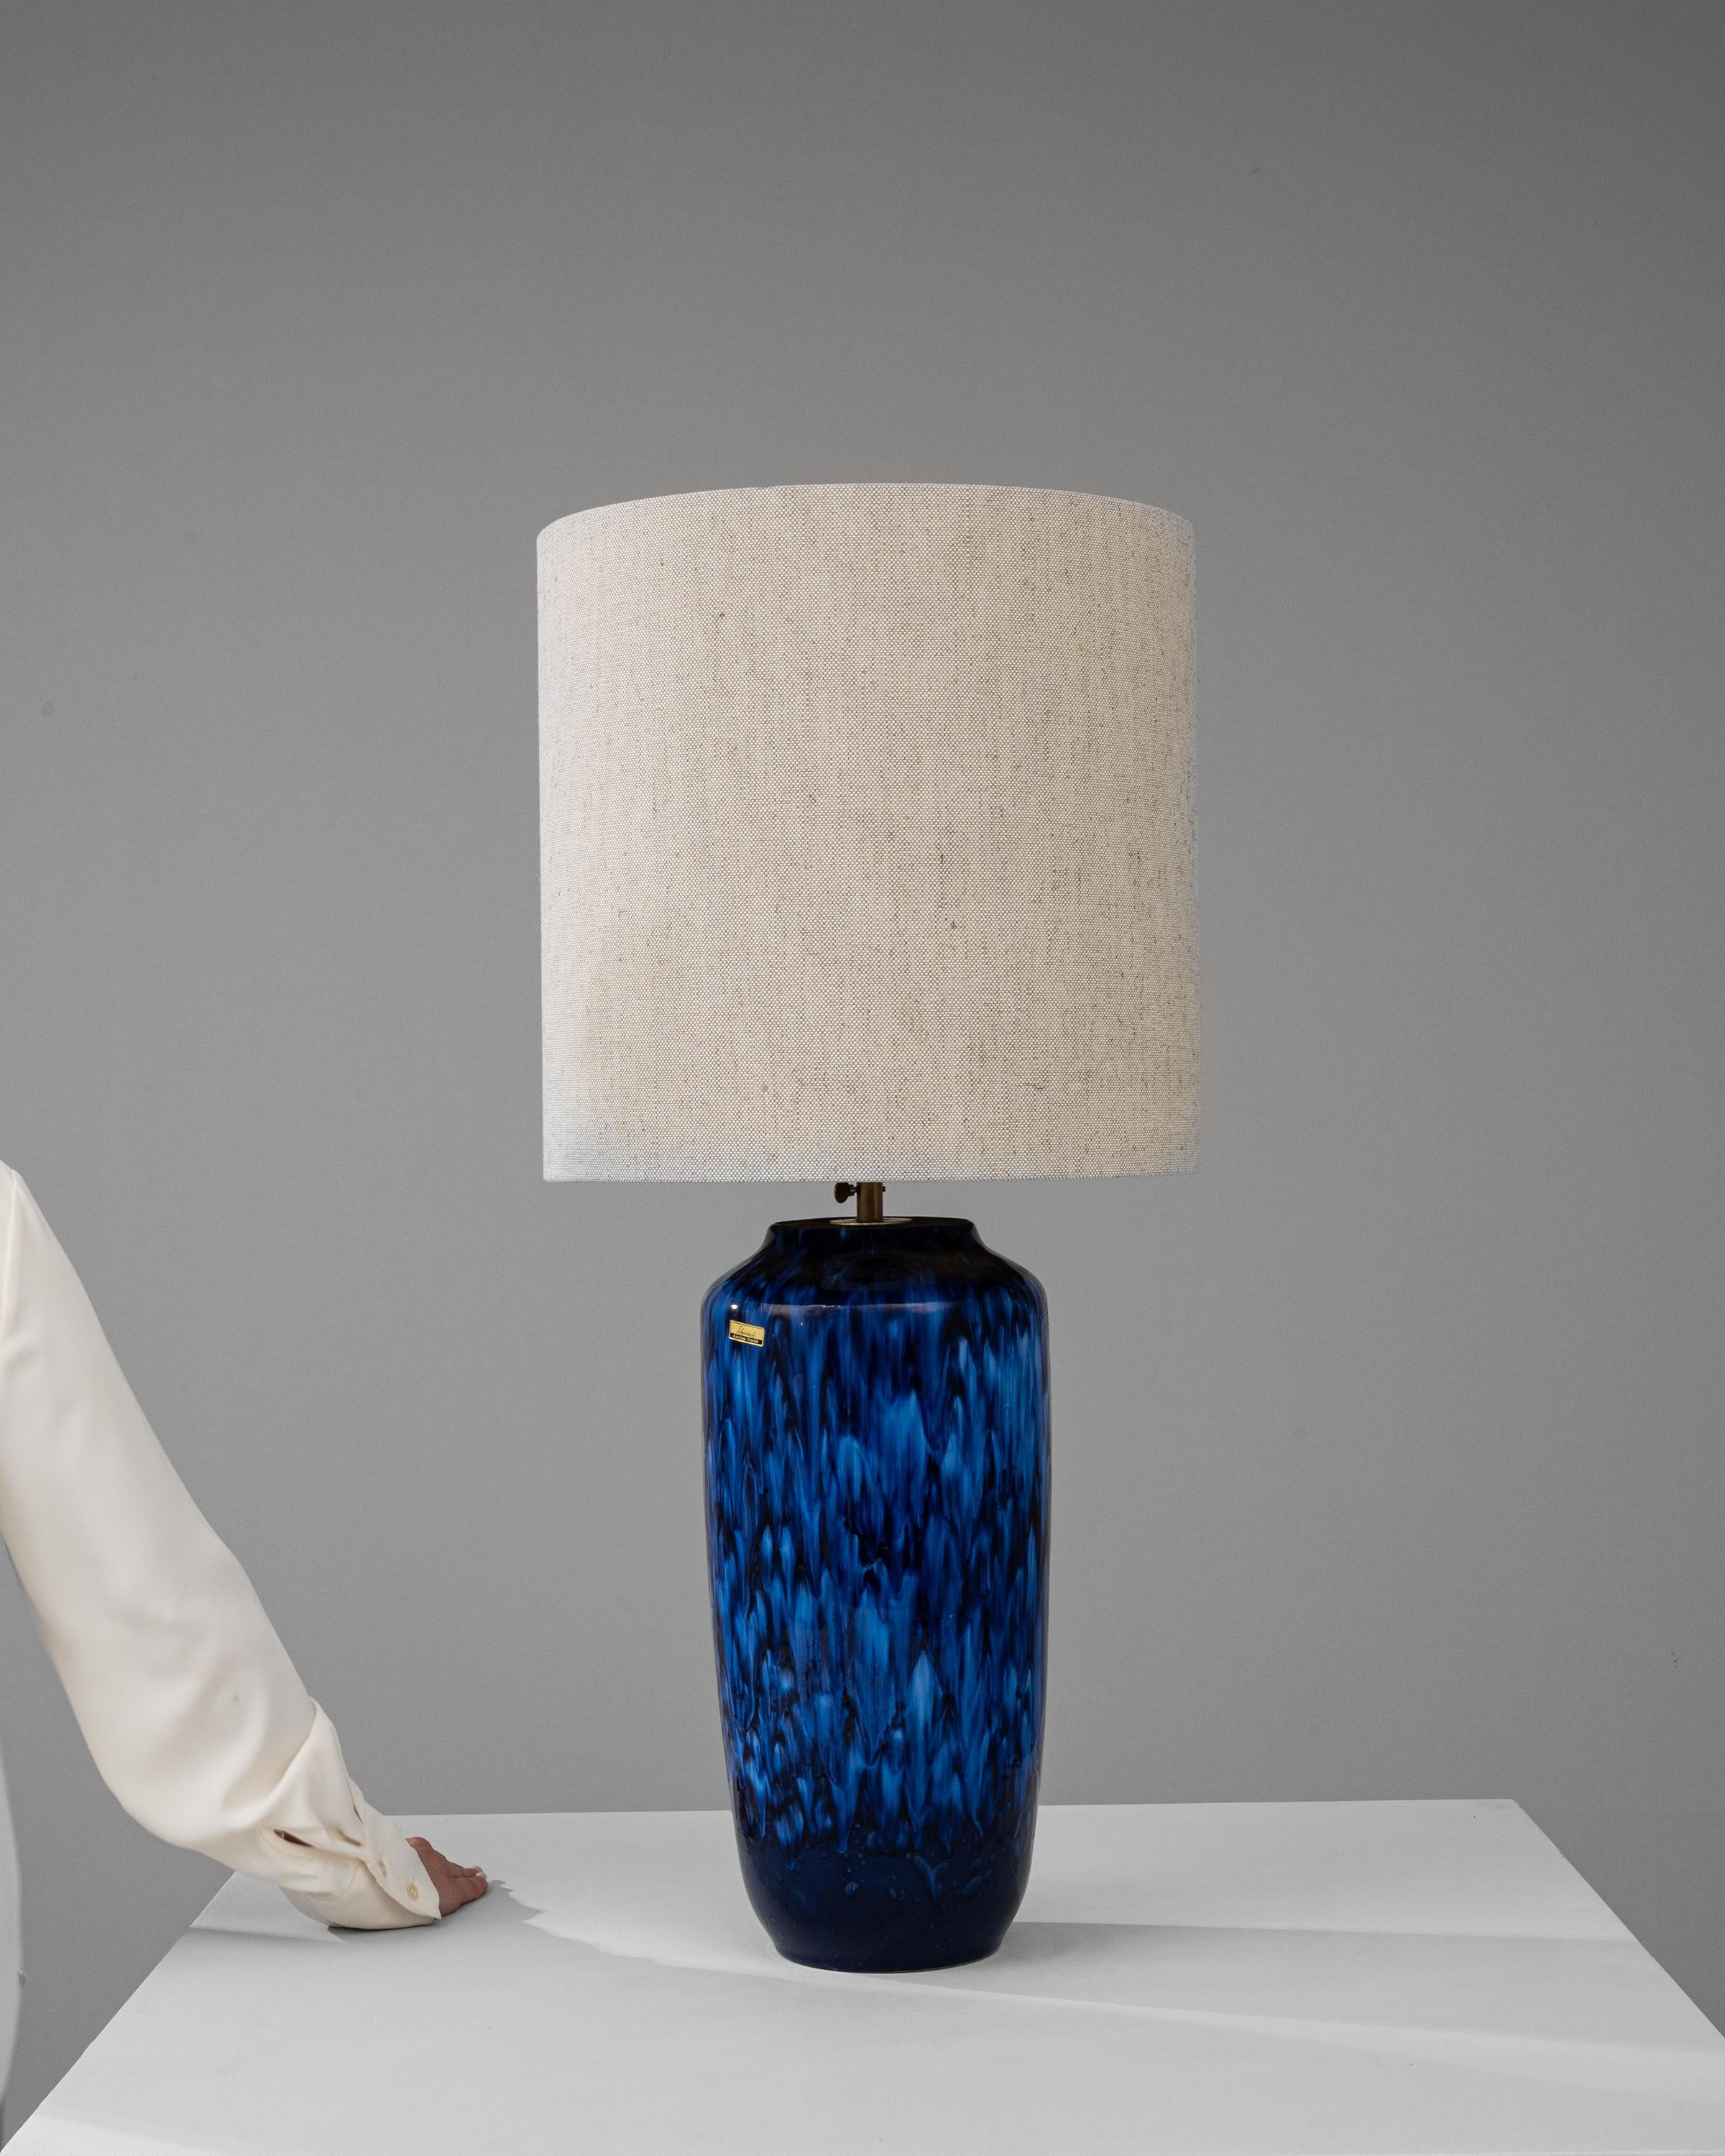 Imbued with the deep blues of the ocean and the sky, this 20th Century German Ceramic Table Lamp from Scheurich's Europ Linie collection is a testament to the company's dedication to quality and style. The lamp's body, with its fluid, cascading